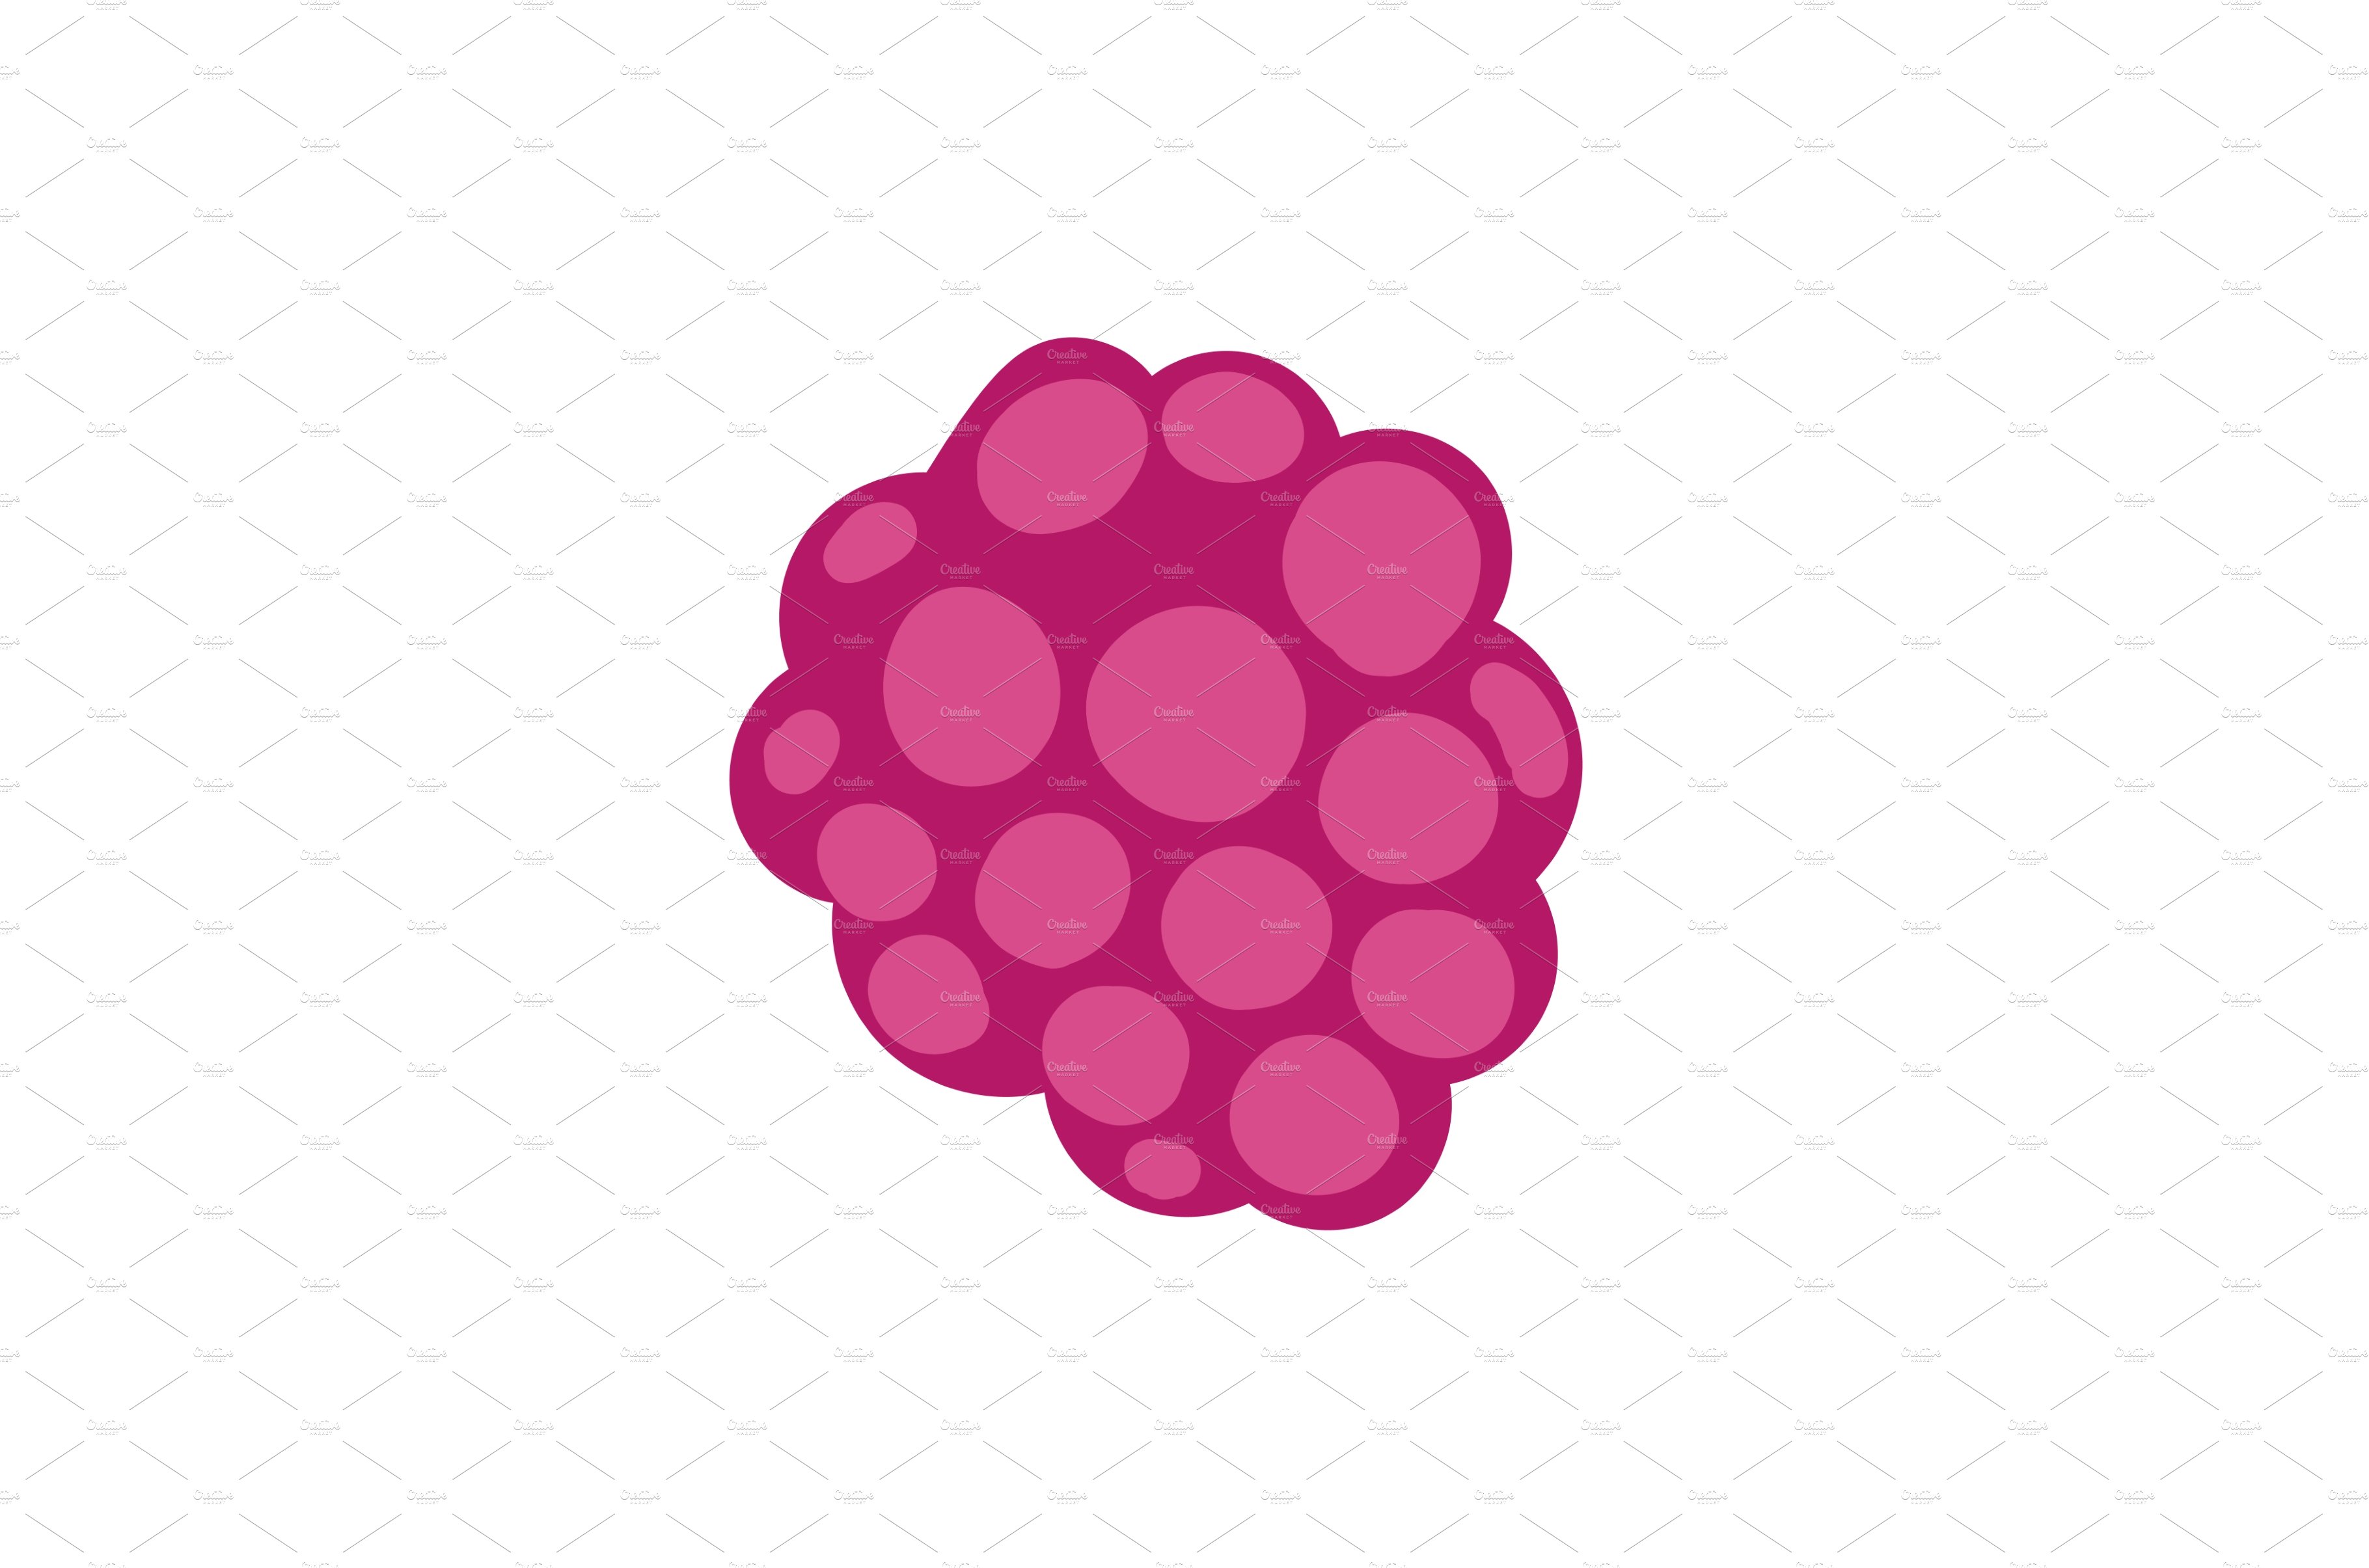 Raspberry on white background vector cover image.